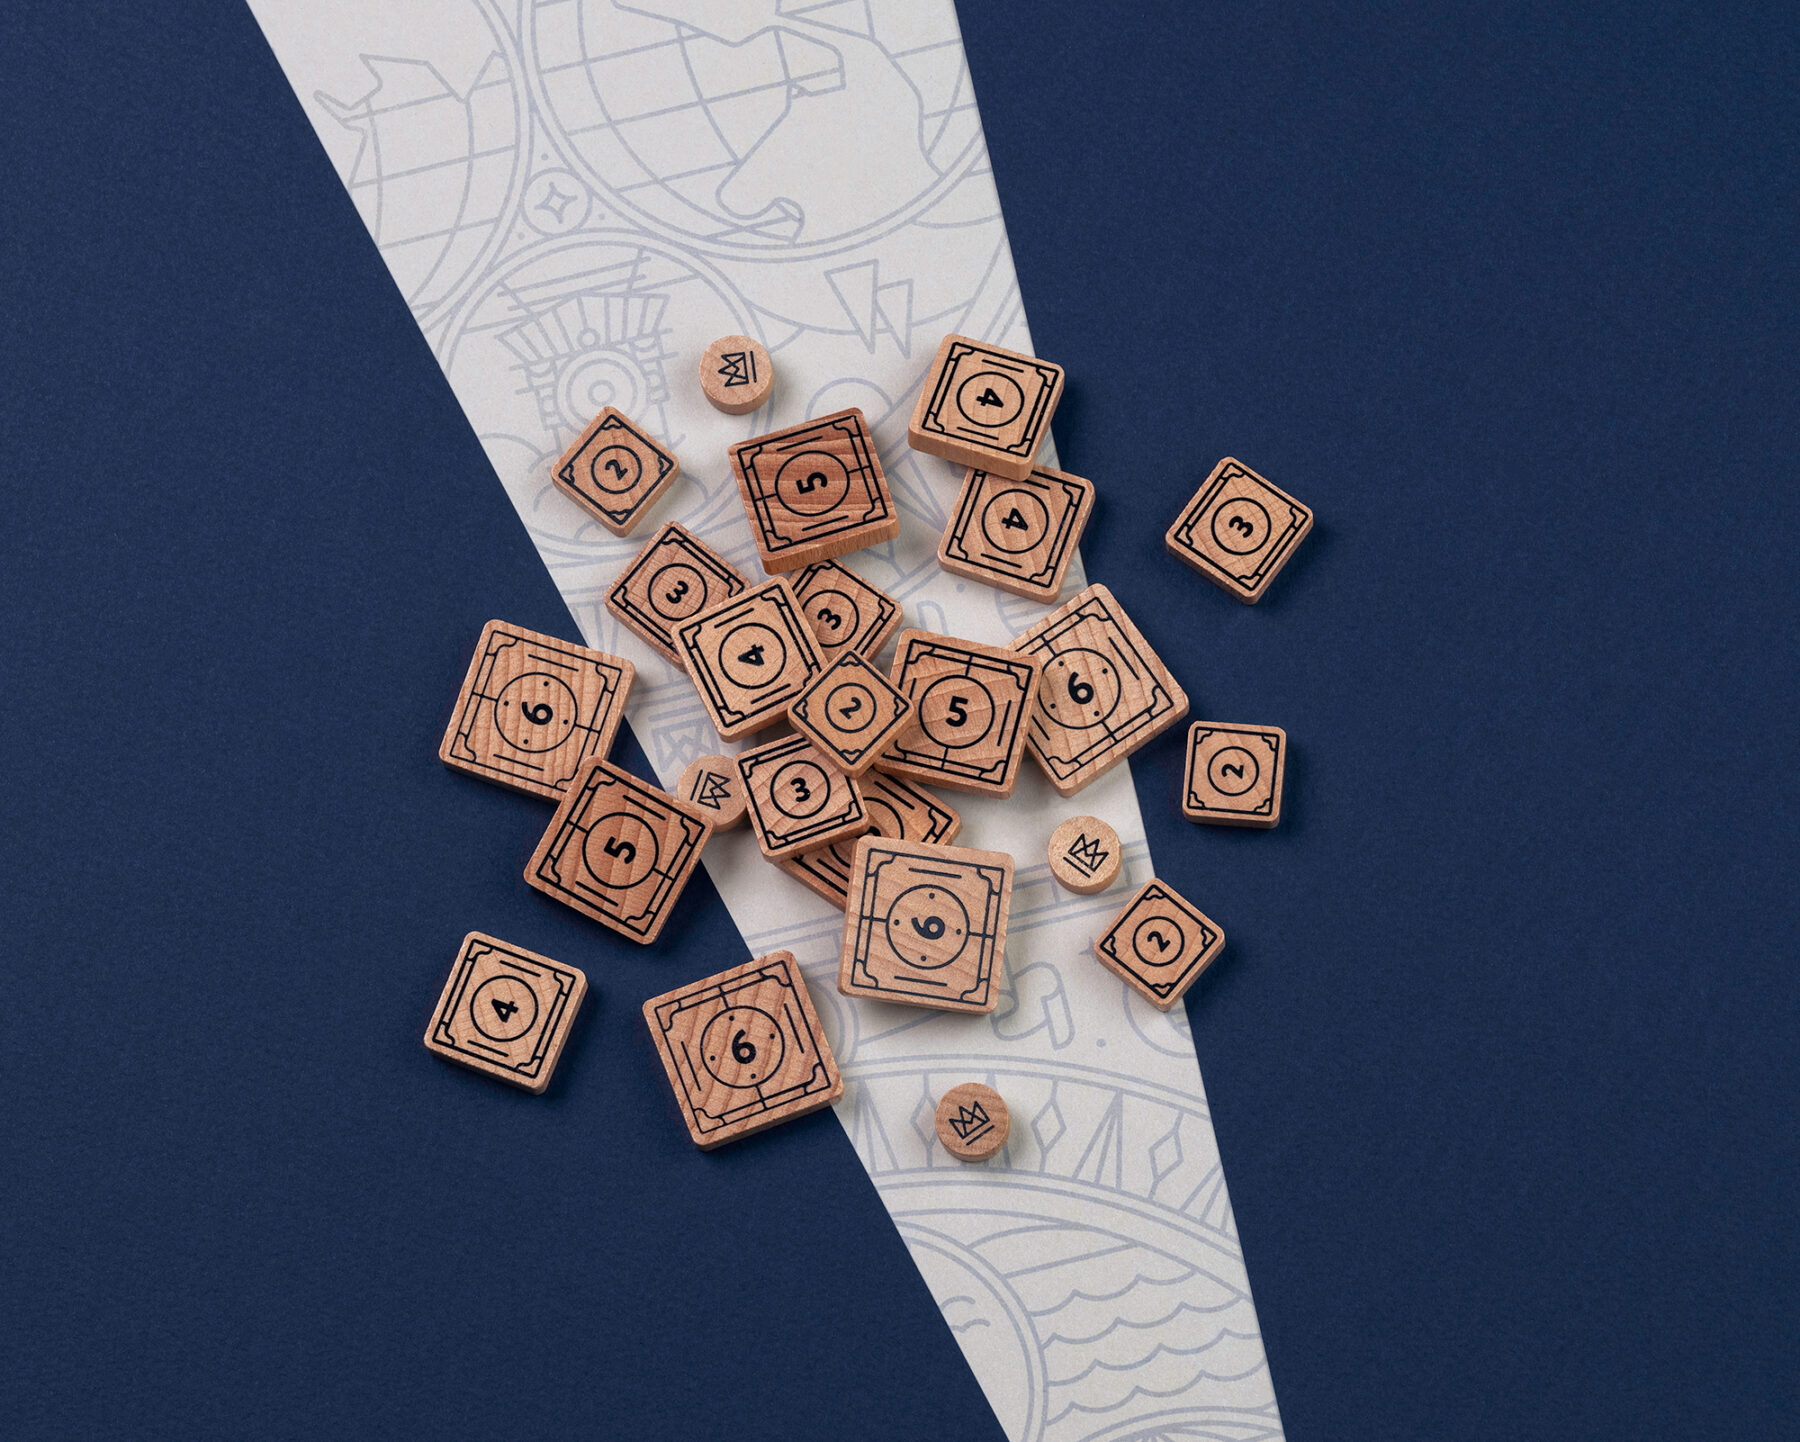 A pile of various numbered wooden tokens.